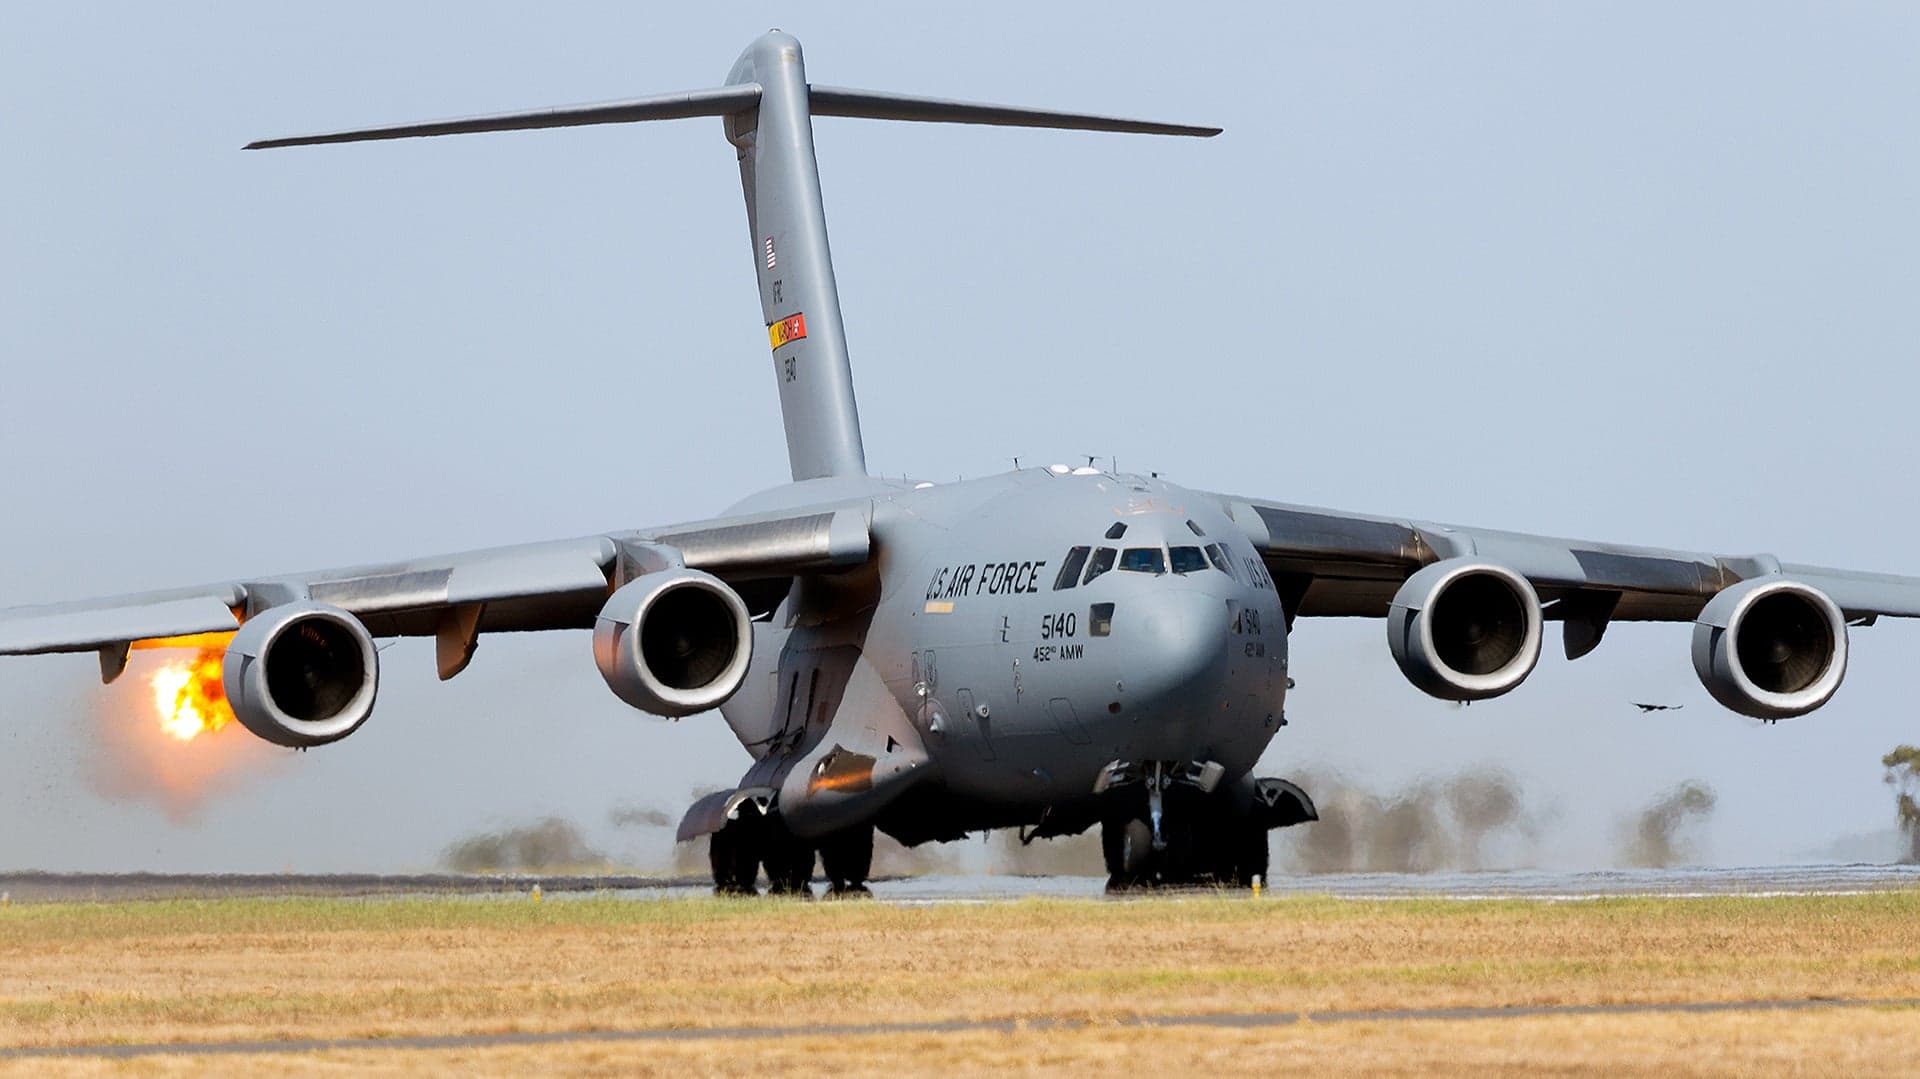 Check Out This Crazy Shot Of A C-17 Ingesting A Big Bird On Takeoff At The Avalon Air Show